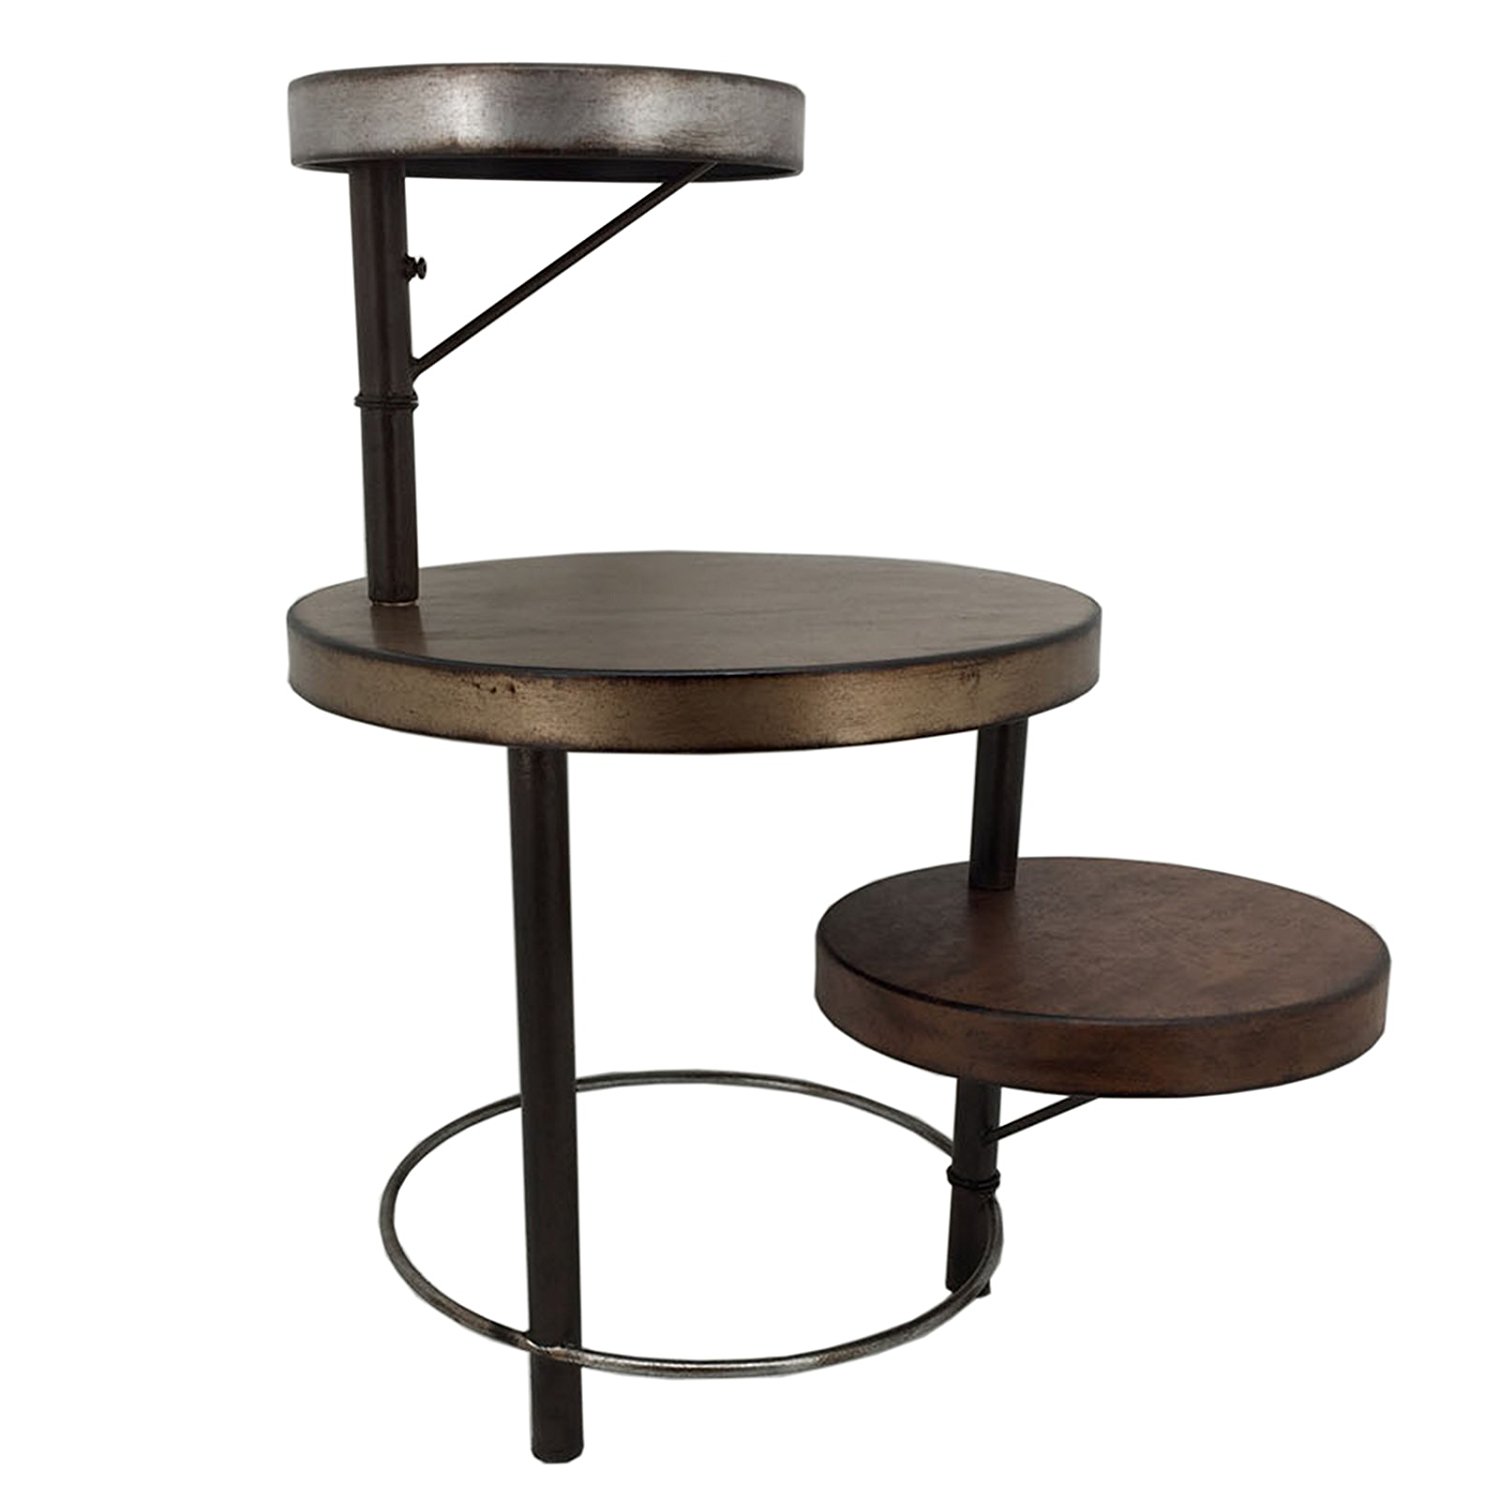 small metal accent table find get quotations sagebrook home tri level brown wood danish retro furniture drop leaf kitchen ikea mirrored foyer pier one clearance chairs rugs pool